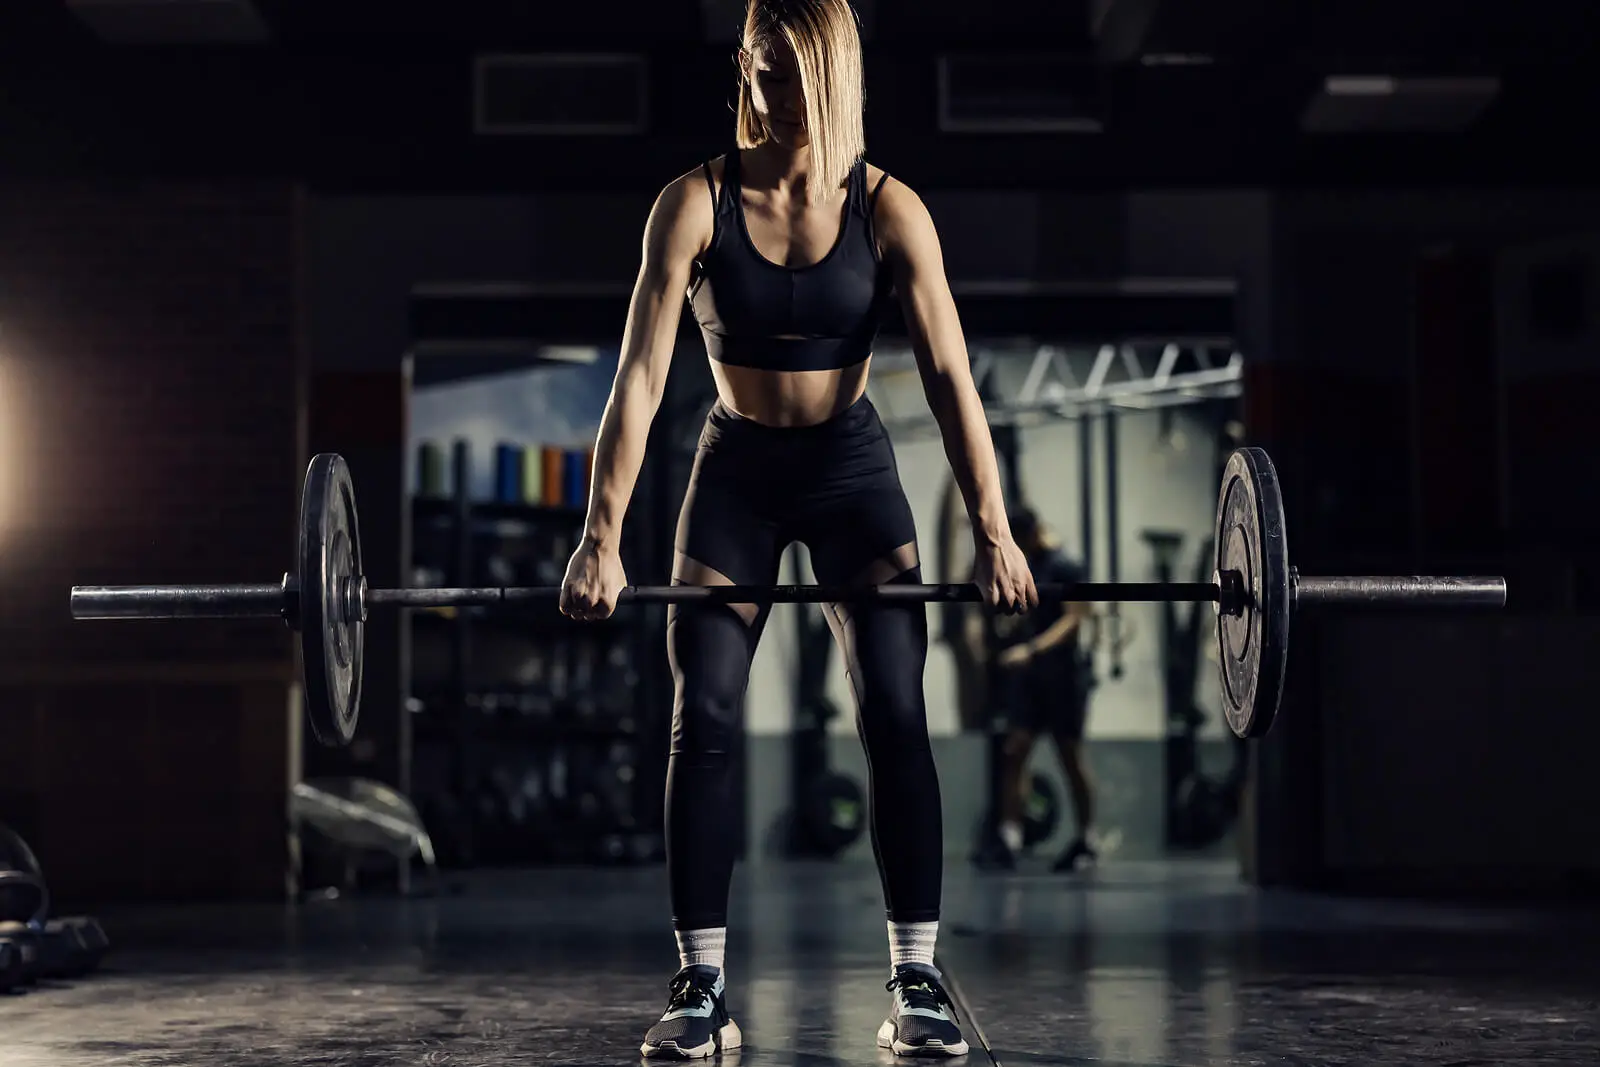 A Muscular Woman Exercising And Lifting Weights In A Gym. Streng